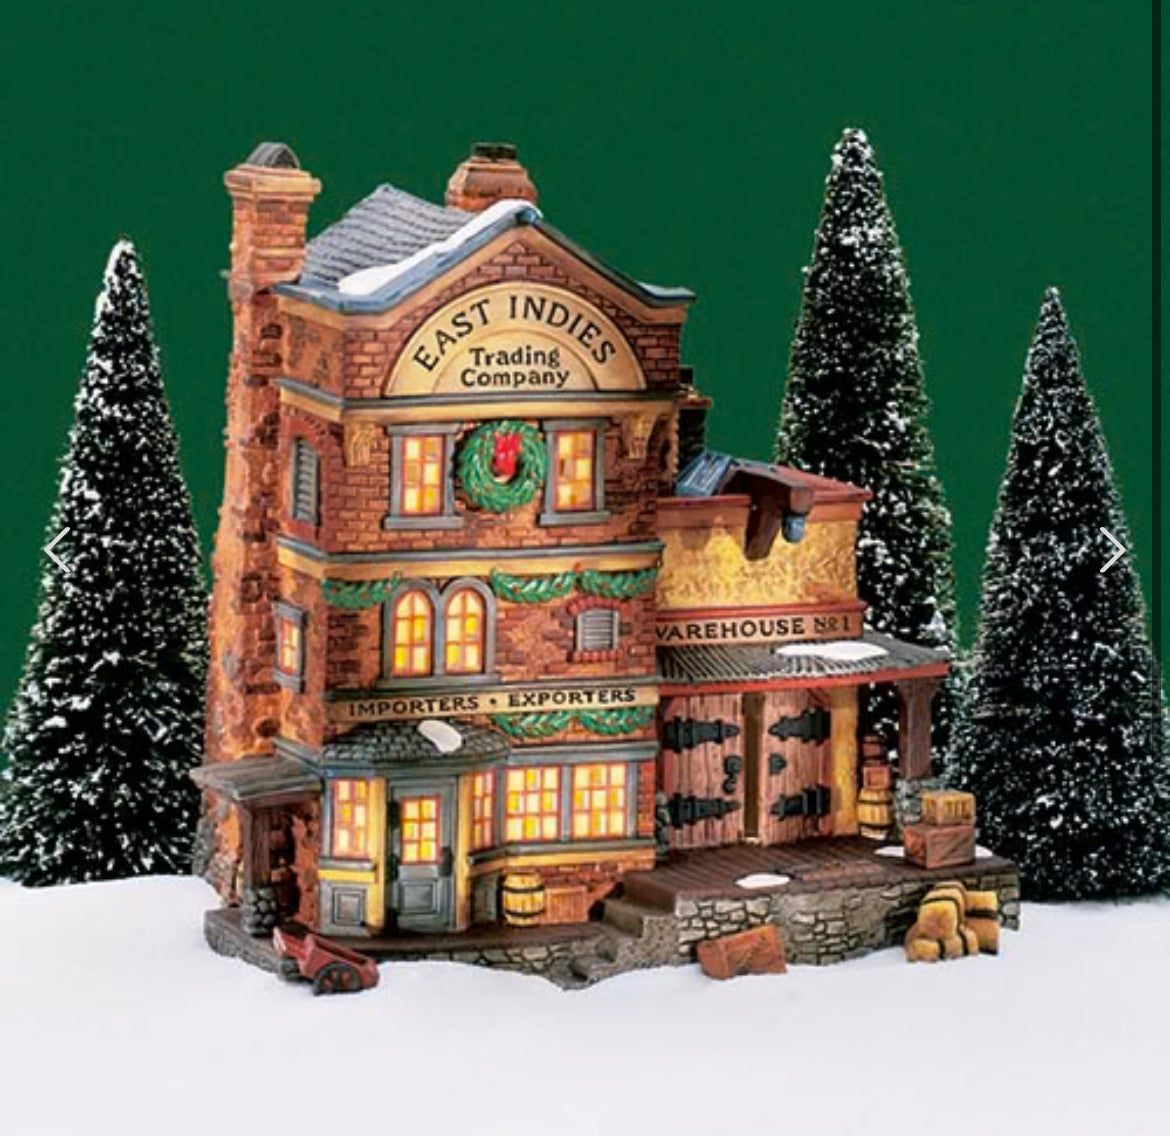 Department 56 - Heritage Village - East Indies Trading Co.